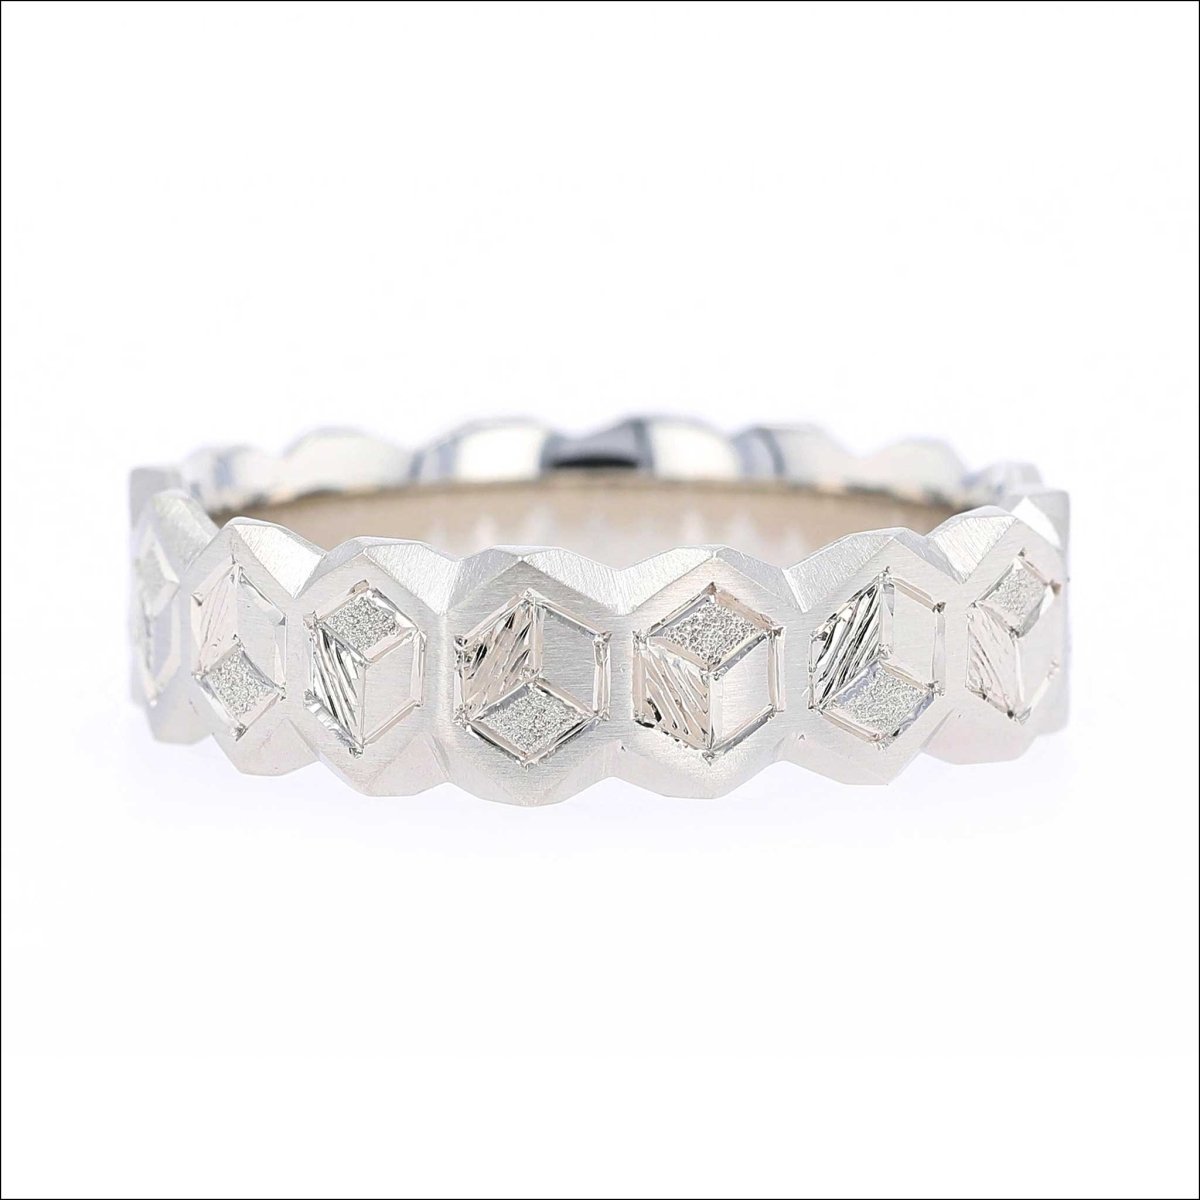 Hand Engraved Hexi-Cube Pattern Men's Band 14KW - JewelsmithBands